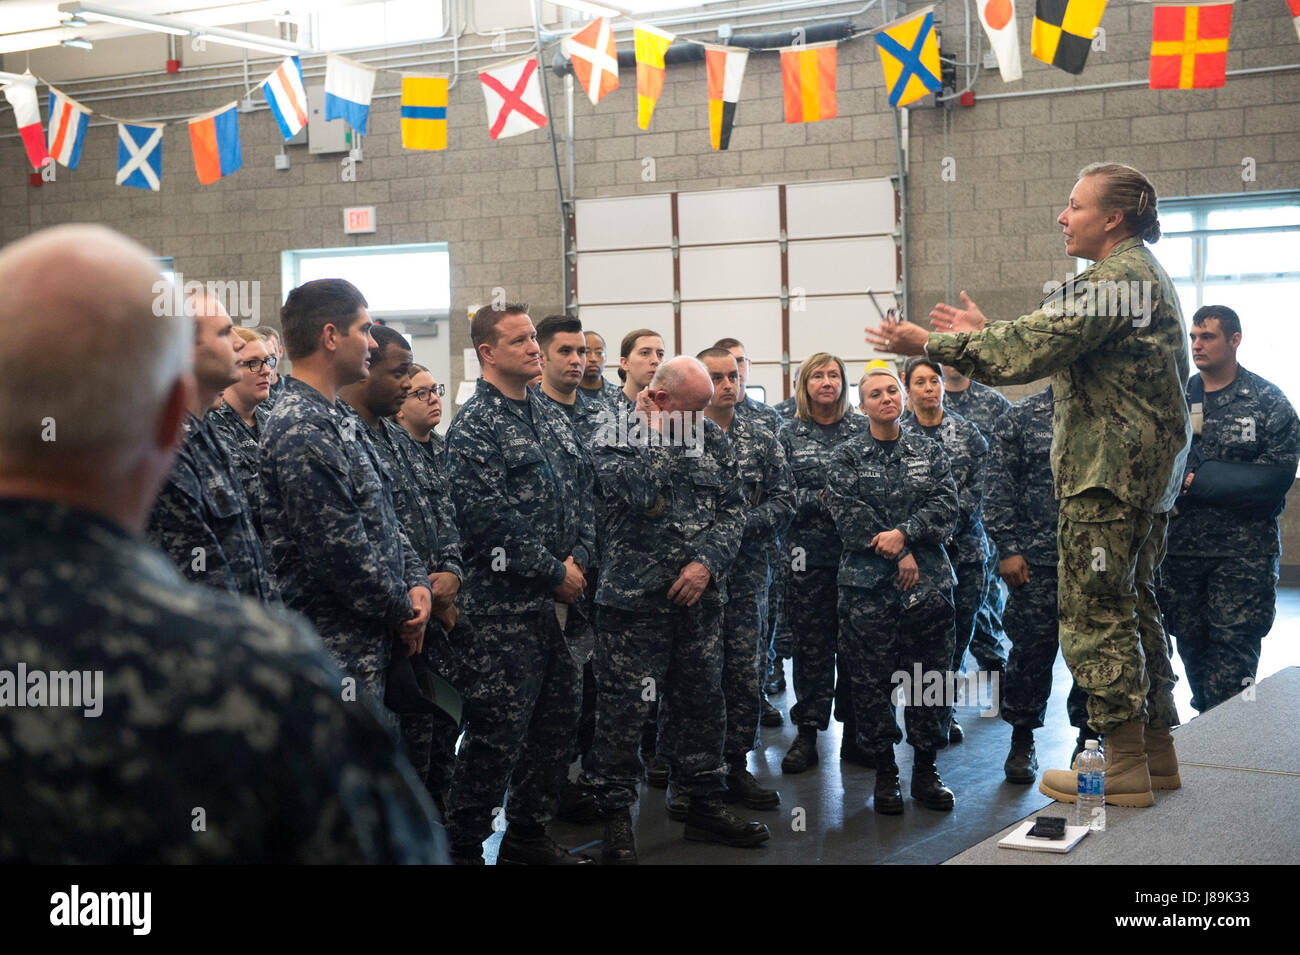 170520-N-QP351-083 INDIANAPOLIS (May 20, 2017) Rear Admiral Linda Wackerman, Deputy Commander, U.S. Naval Forces Southern Command, 4th Fleet, visits with Sailors from Navy Operational Support Center Indianapolis during an Admirals Call. Wackerman who also serves as the flag mentor for NOSC Indianapolis, held an all-hands Q&A session for E-6 and below Sailors to address upcoming changes and get feedback regarding Navy-related issues they feel need to be improved. (U.S. Navy photo by Mass Communication Specialist 2nd Class (SW/EXW/AW/SC) J. Michael Schwartz) Stock Photo